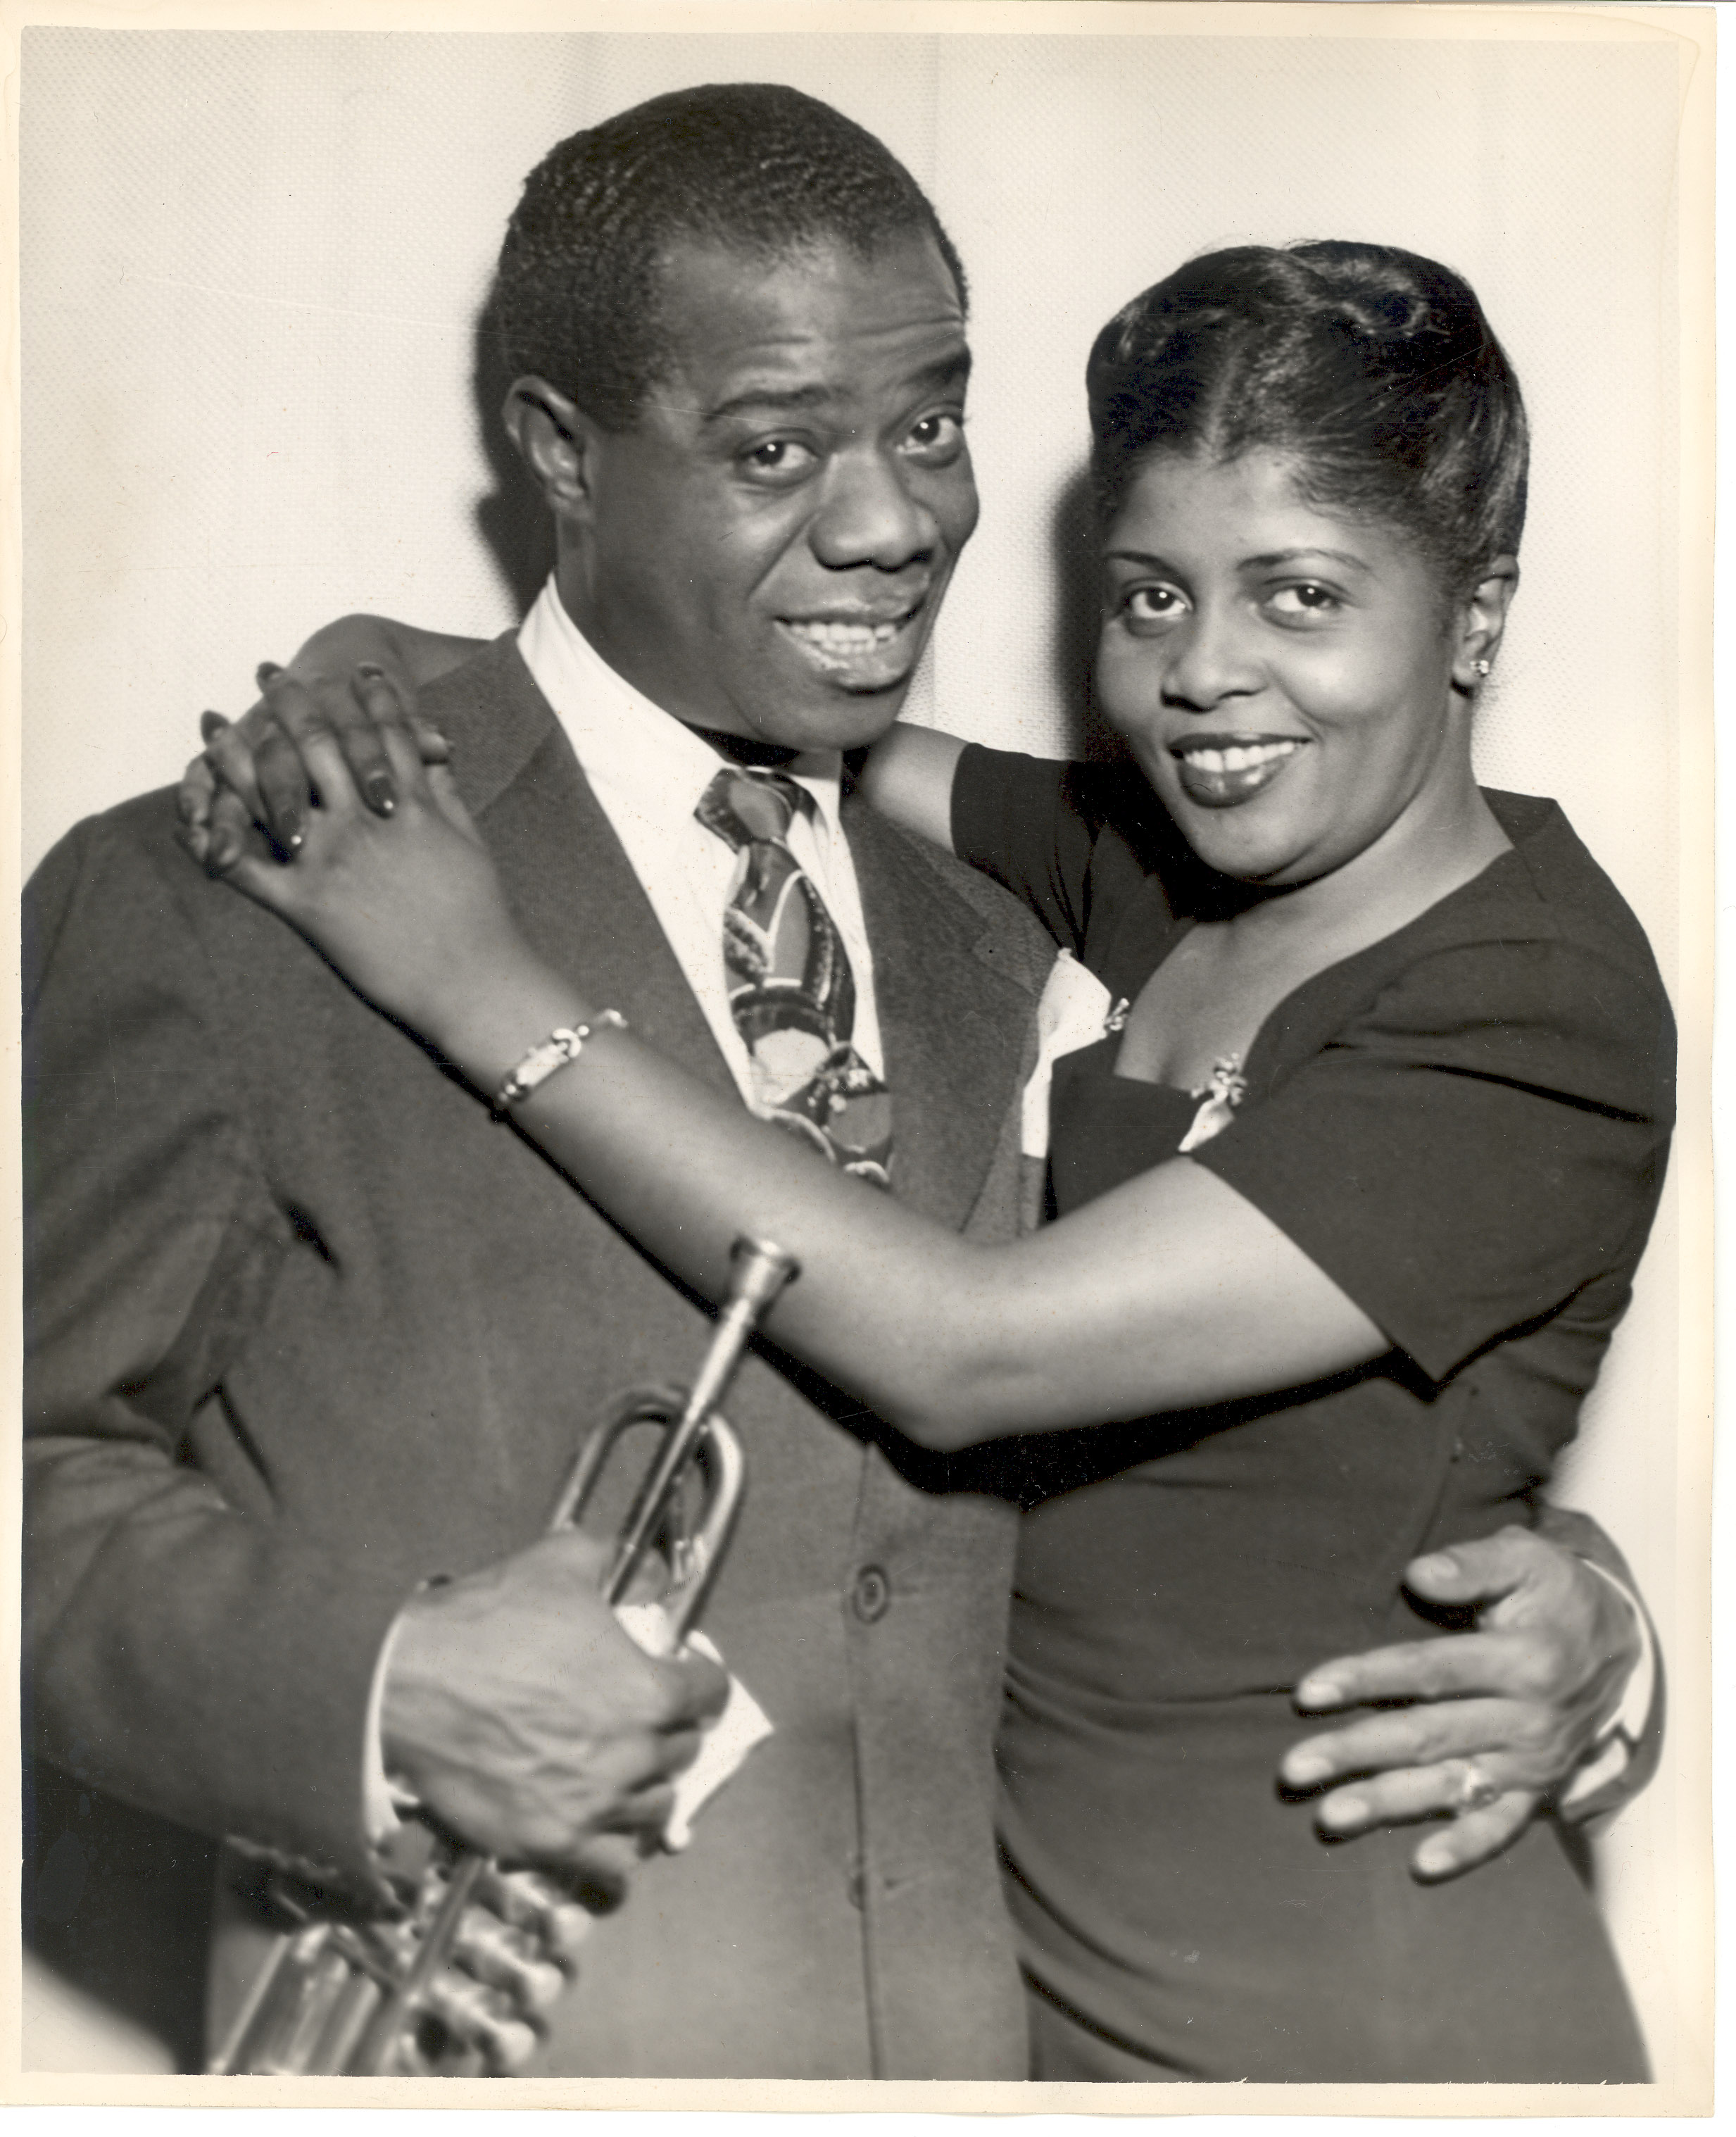 Louis and wife Lucille, who was fined for possessing marijuana